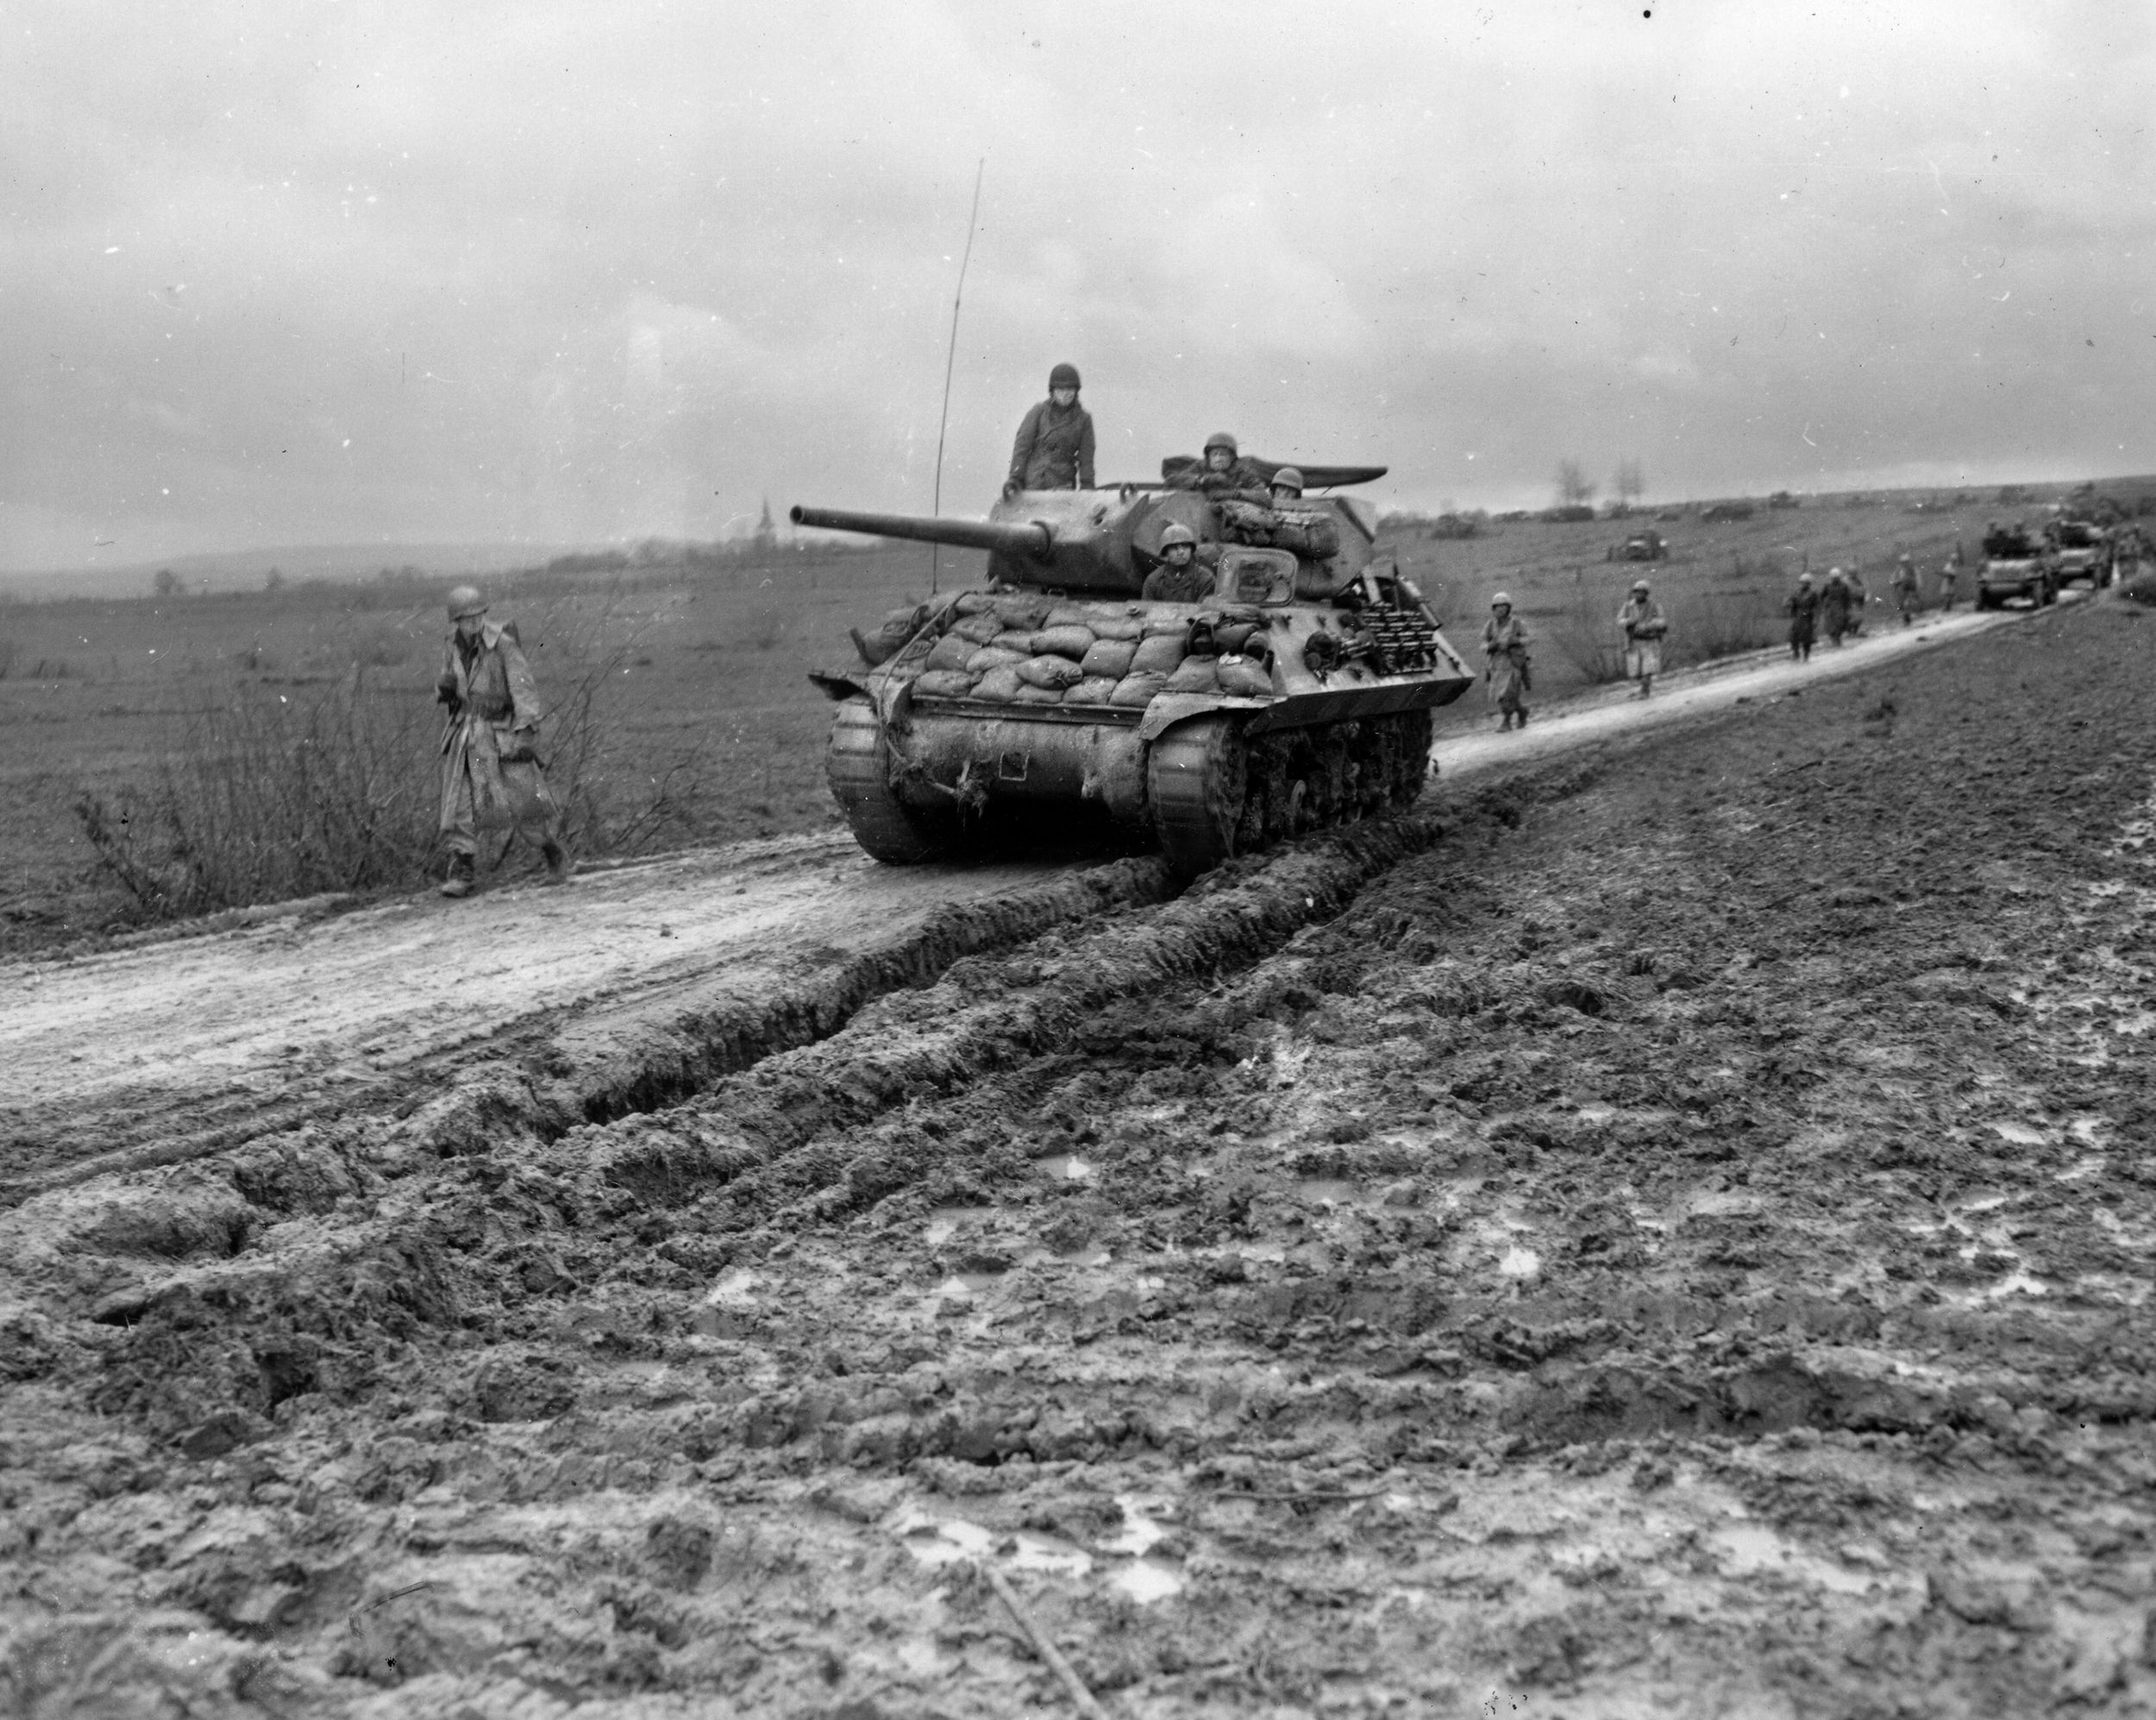 With winter coming on, an M10 Wolverine tank destroyer of Régiment Blindé de Fusiliers Marins, rolls down a muddy road toward the front near Halloville, France, November 1944.